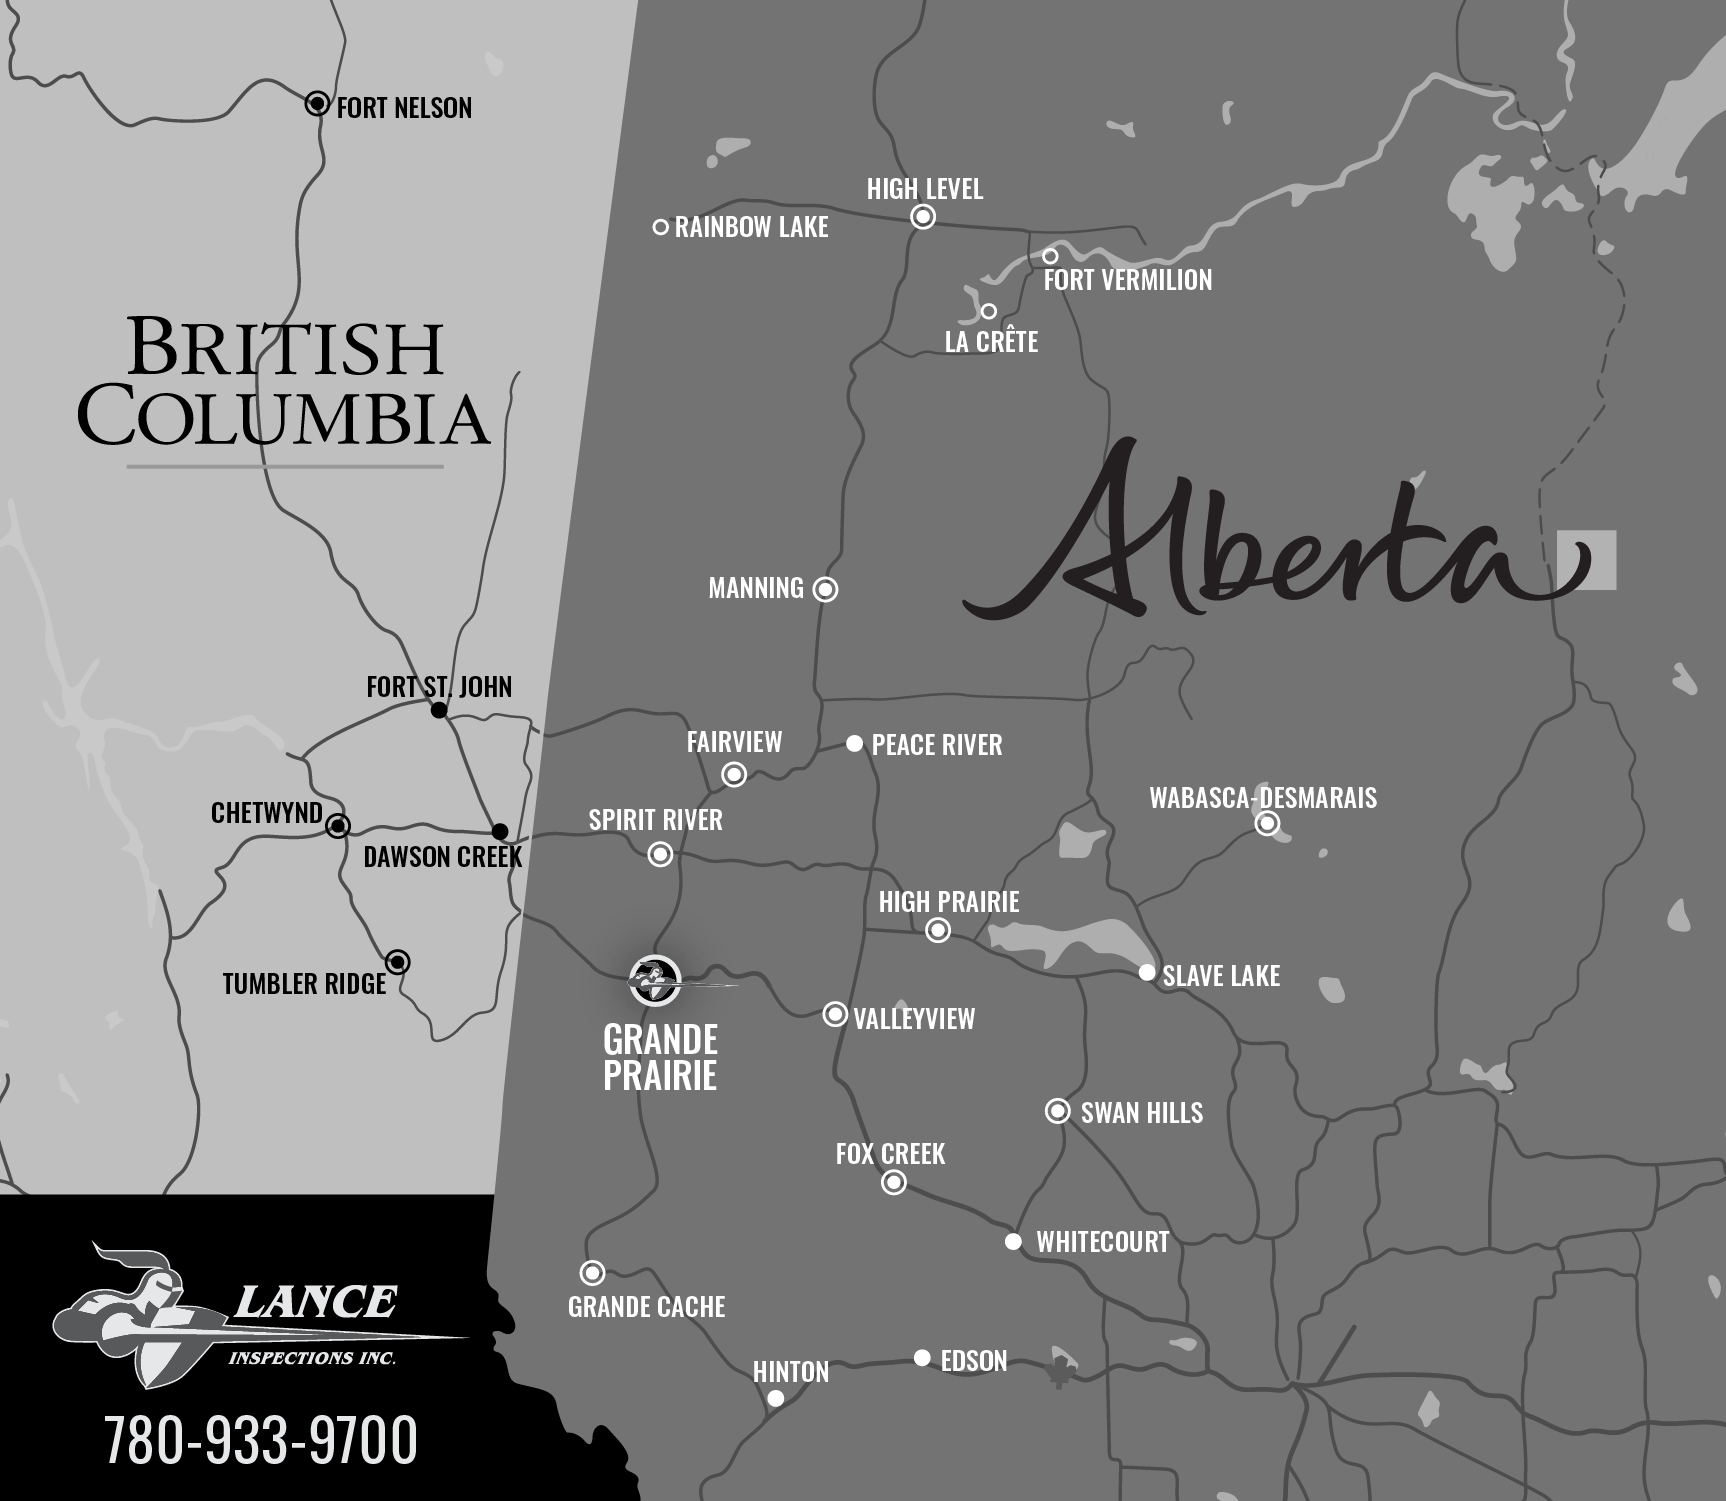 Lance Inspections - Servicing Northern Alberta and Northeast British Columbia